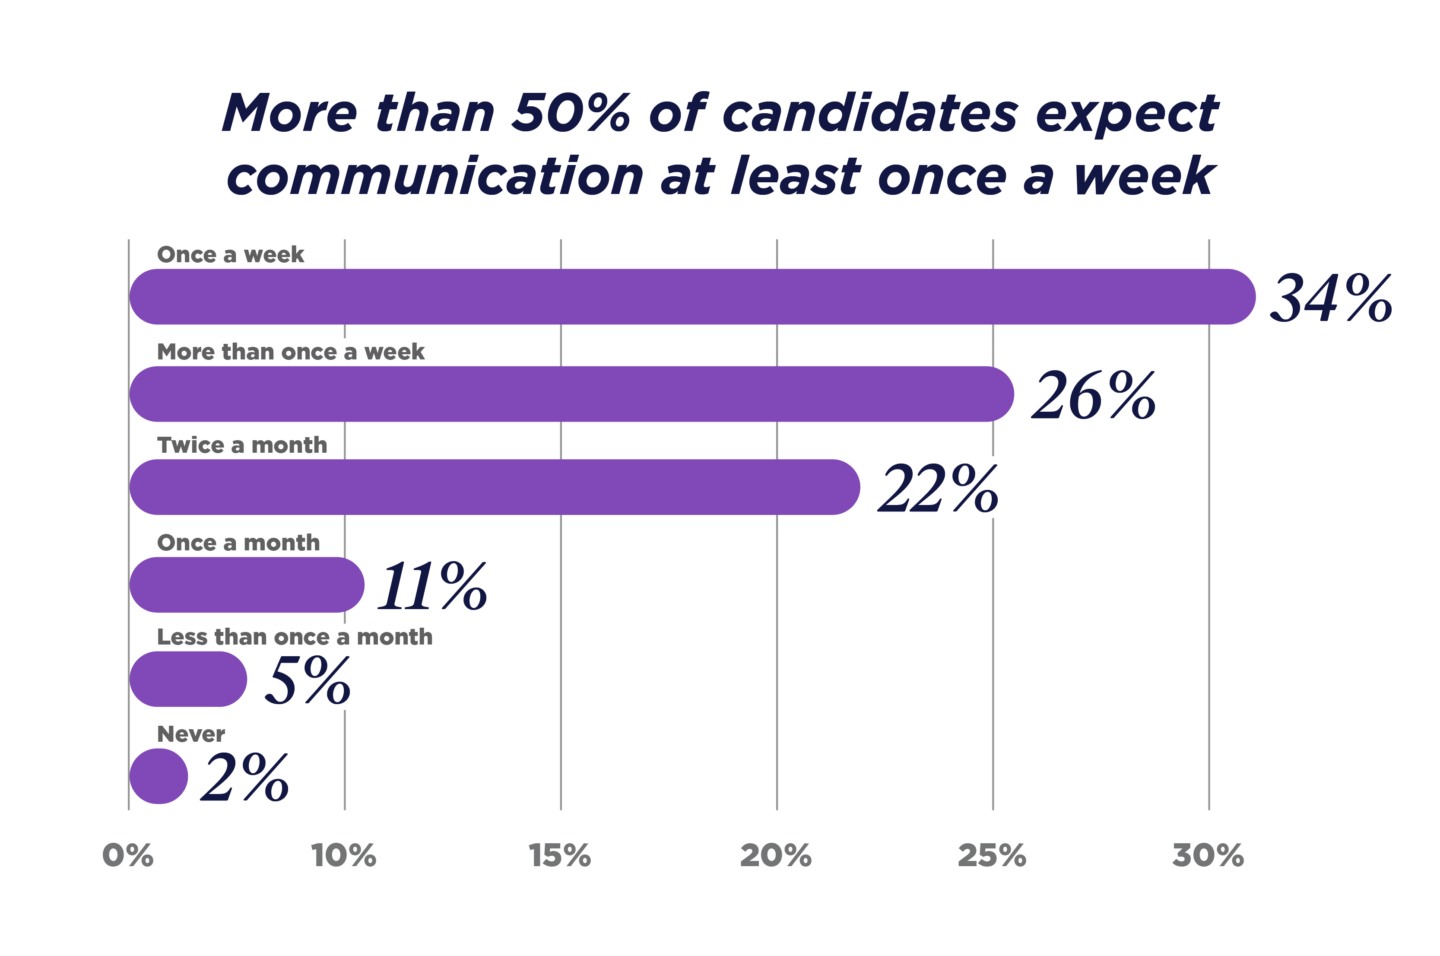 GRID_Talent Trends Report_2023_UKI Graphs_More than 50% of candidates_V1